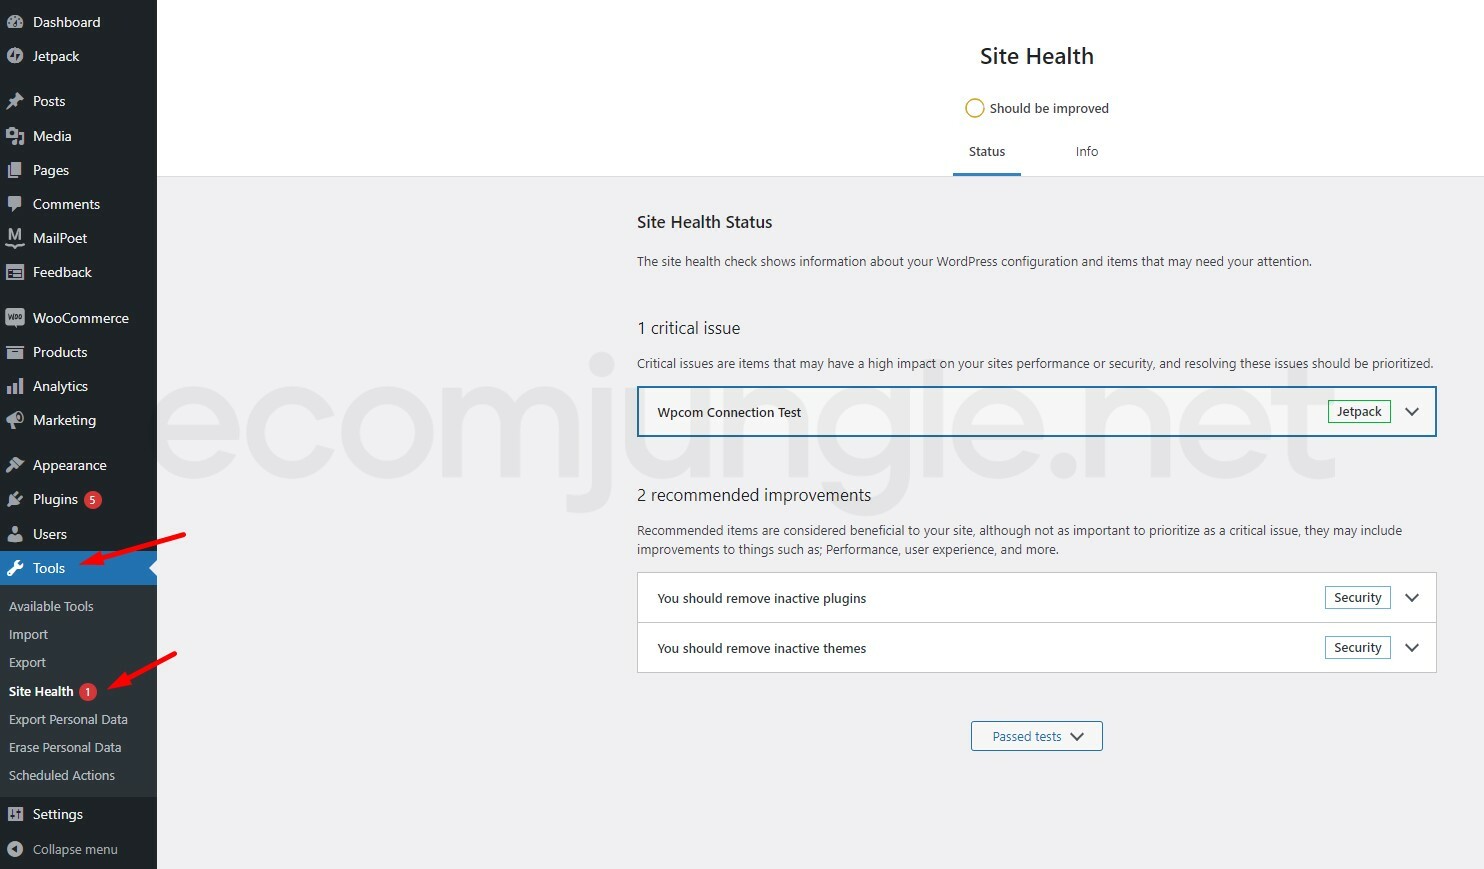 Site Health – View the Site Health summary provided by WordPress and check any recommended improvements to make your site run more smoothly and safely